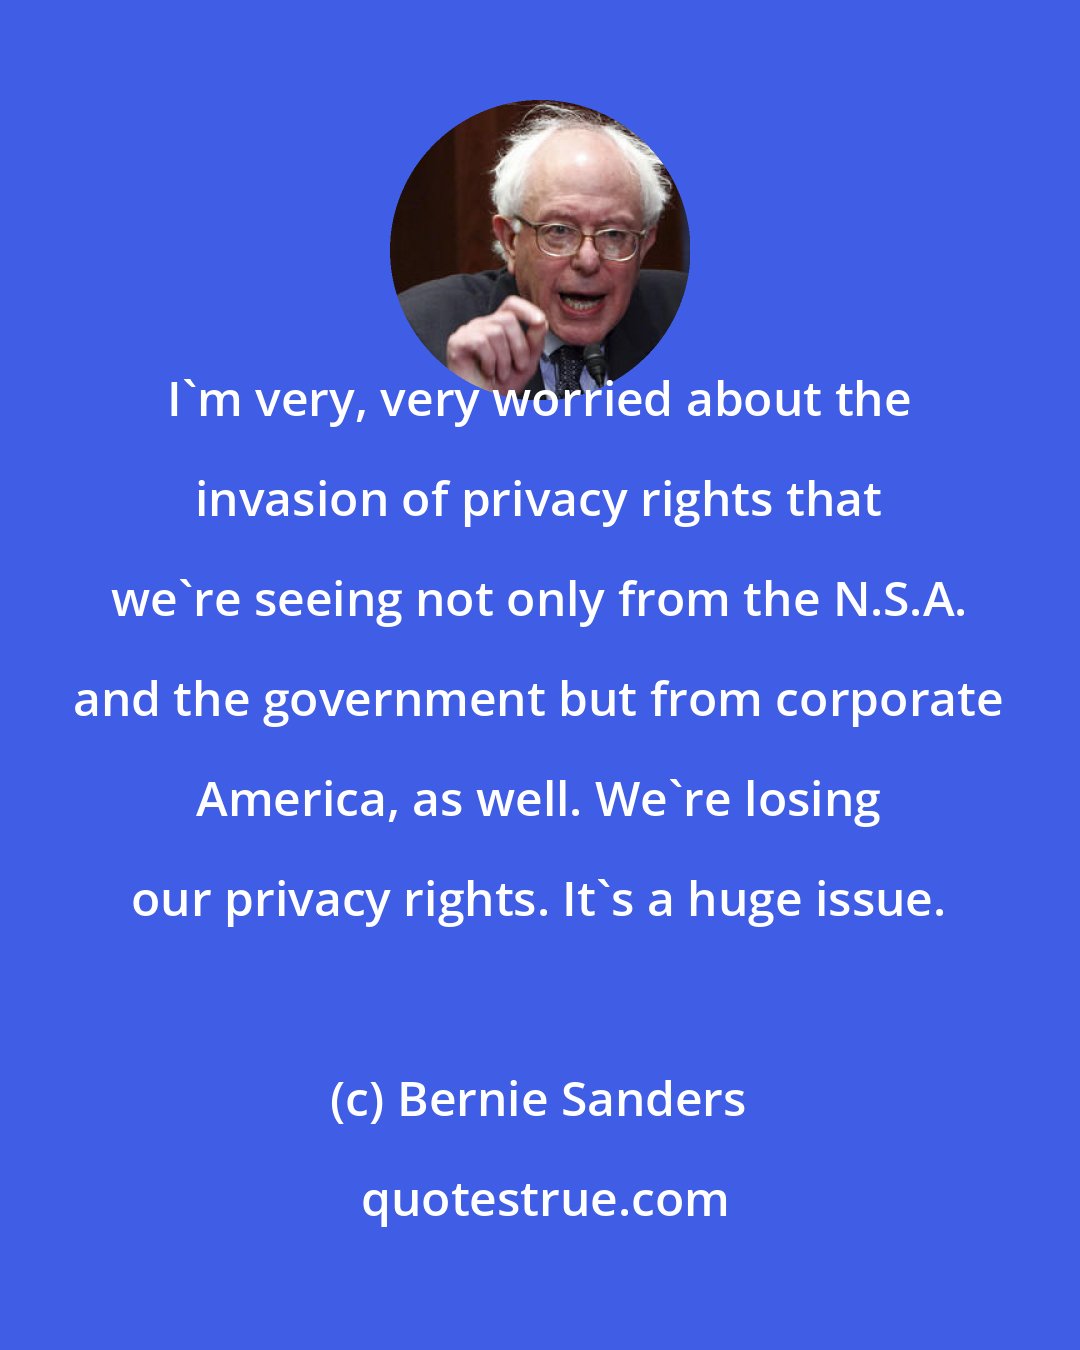 Bernie Sanders: I'm very, very worried about the invasion of privacy rights that we're seeing not only from the N.S.A. and the government but from corporate America, as well. We're losing our privacy rights. It's a huge issue.